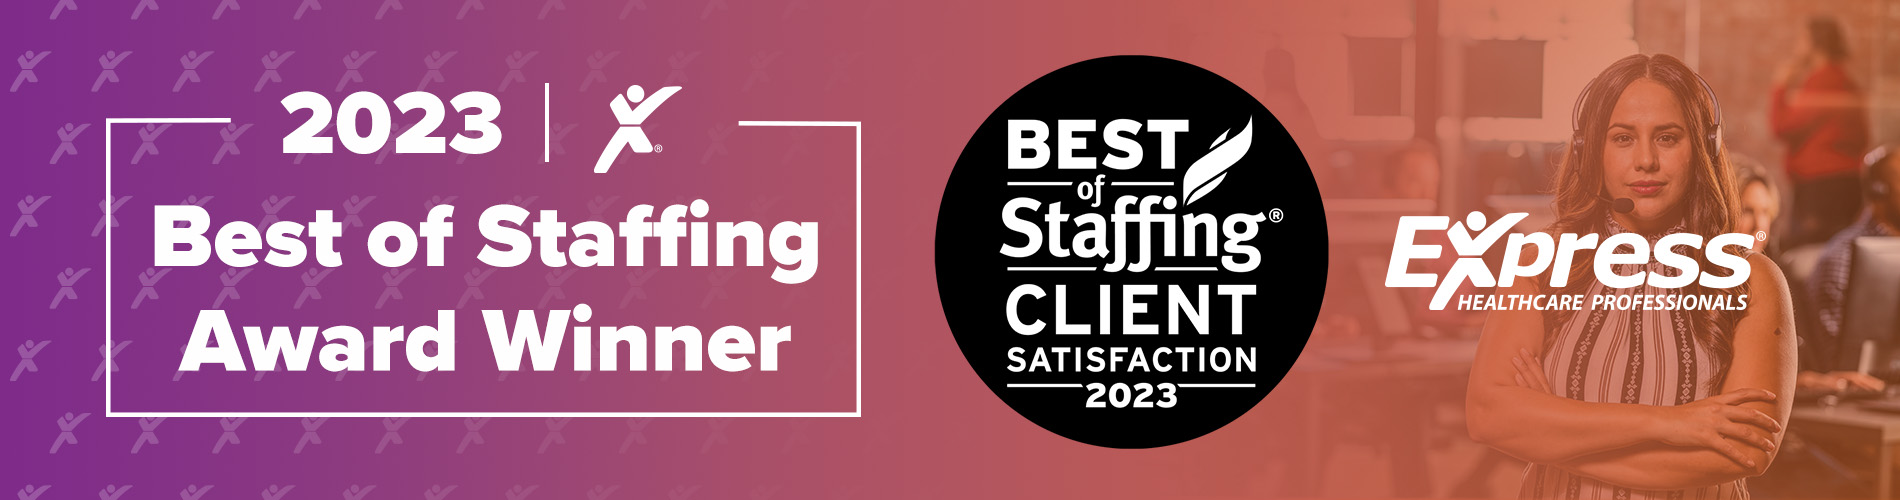 Best in Staffing 2023 Award - Express Healthcare Professionals